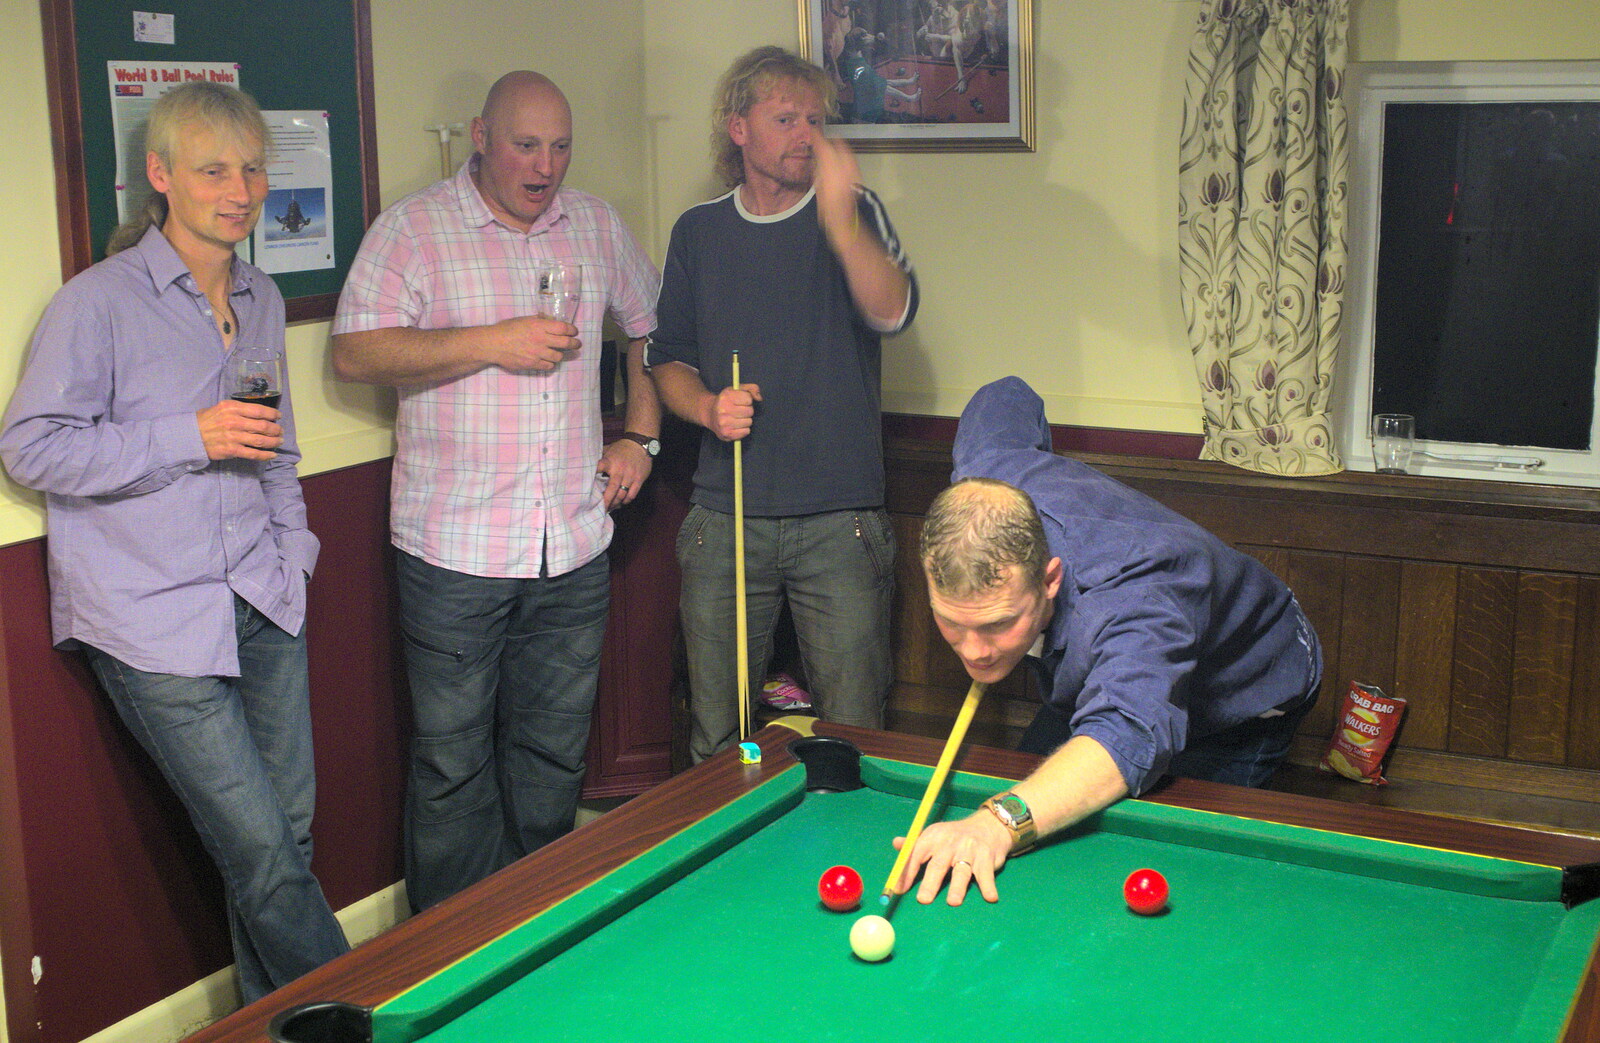 Mikey takes another shot from Stick Game at the Cross Keys, Redgrave, Suffolk - 20th July 2012